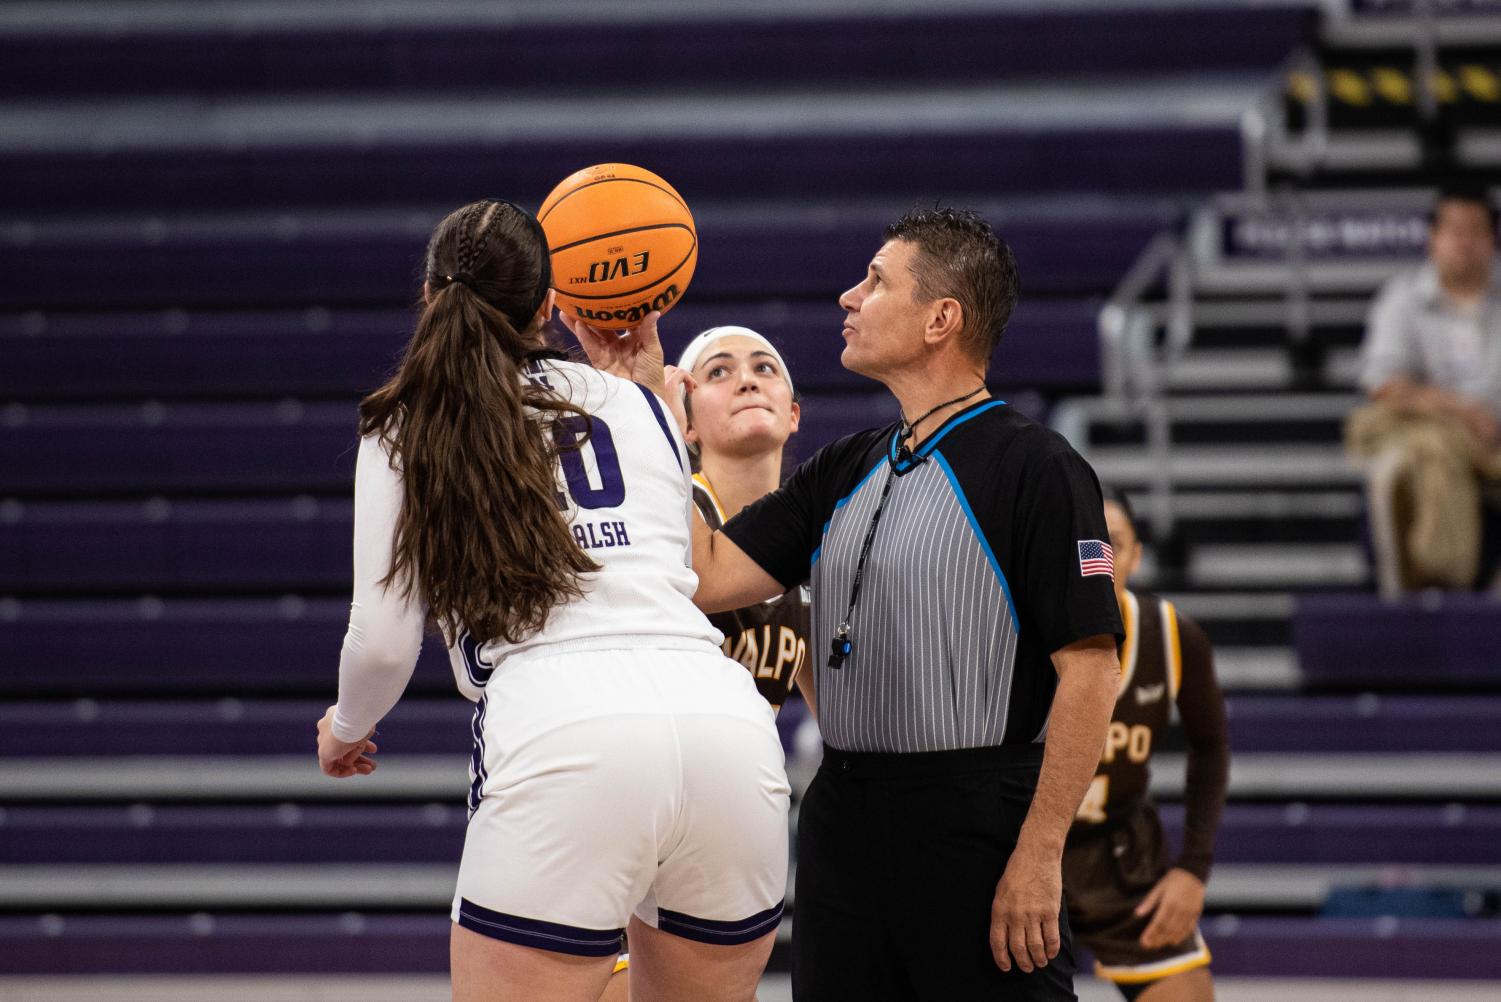 A referee holds a basketball between two athletes.